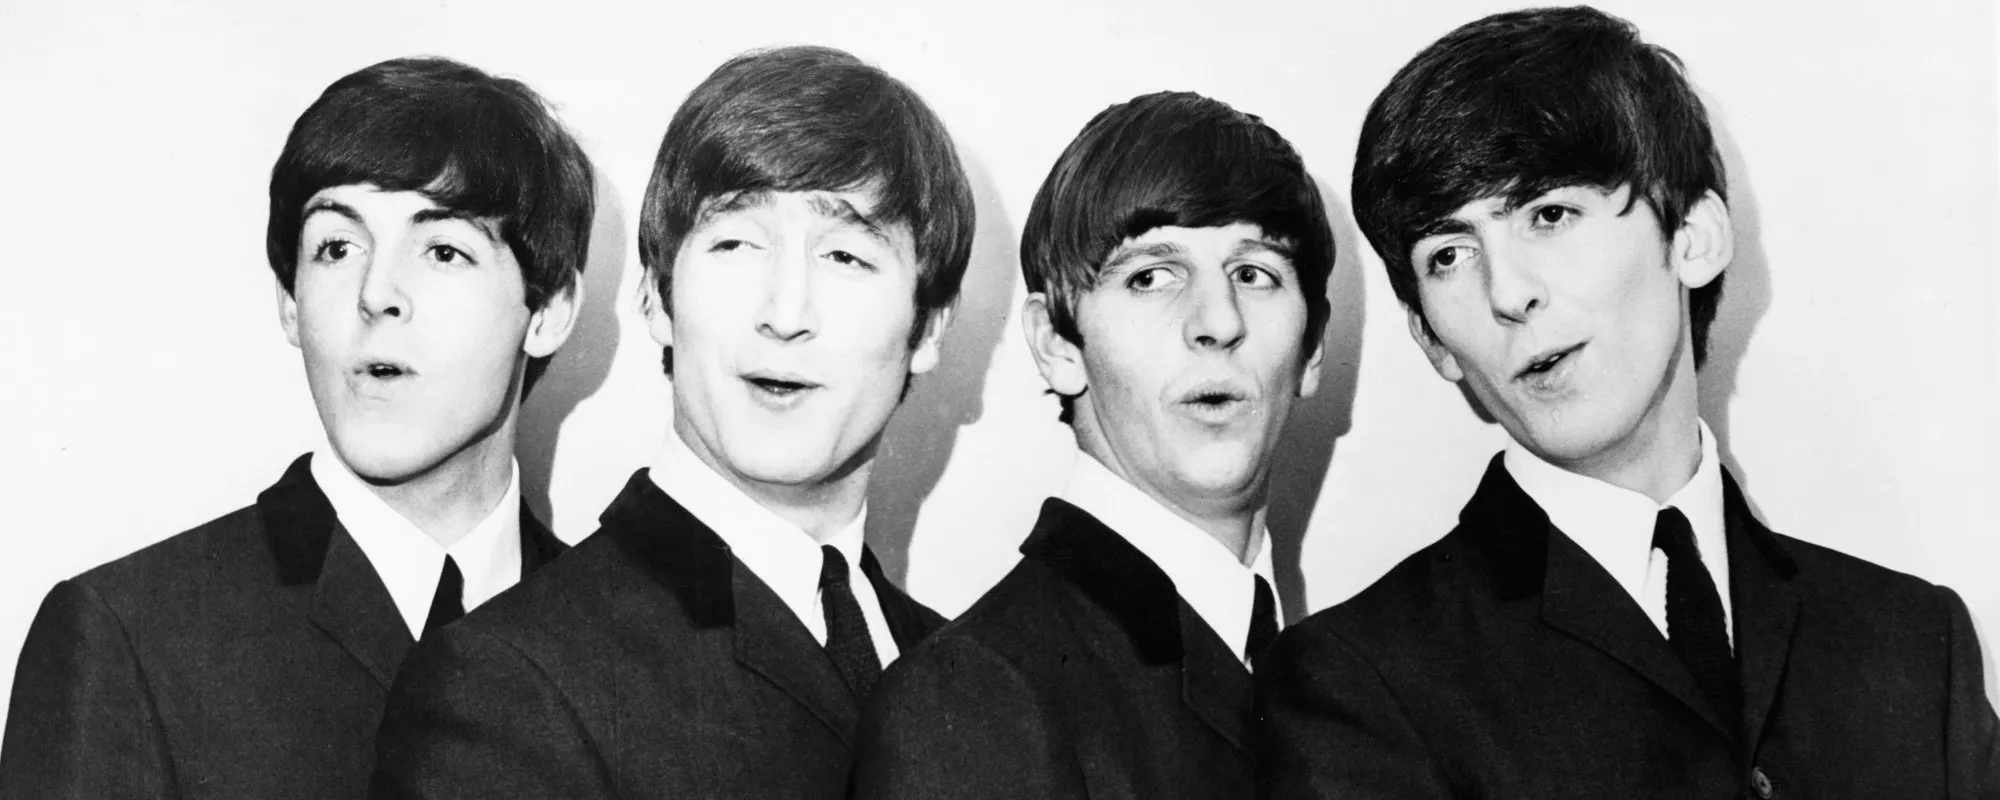 Remember When “She Loves You” Became The Beatles’ Second No. 1 Hit in the U.S. 60 Years Ago